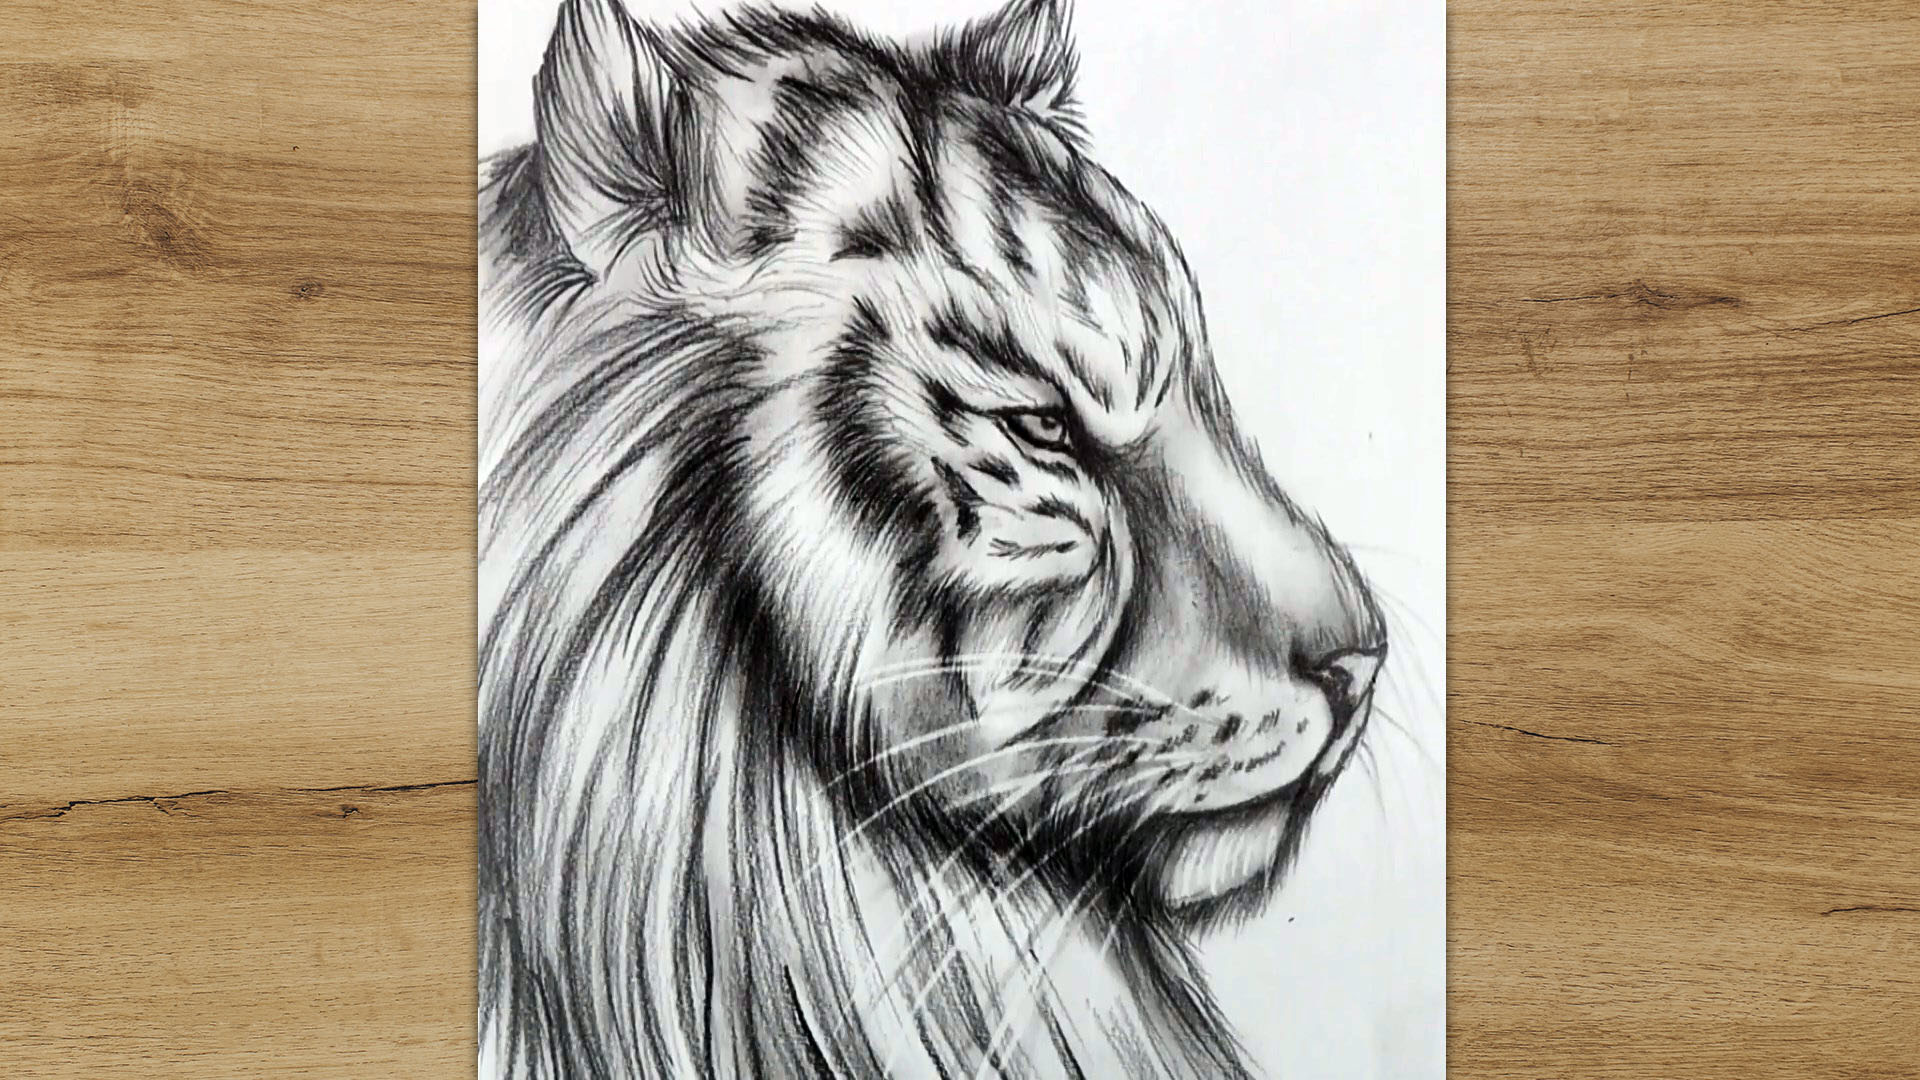 How To Draw Tiger  YouTube Studio Sketch Tutorial  YouTube